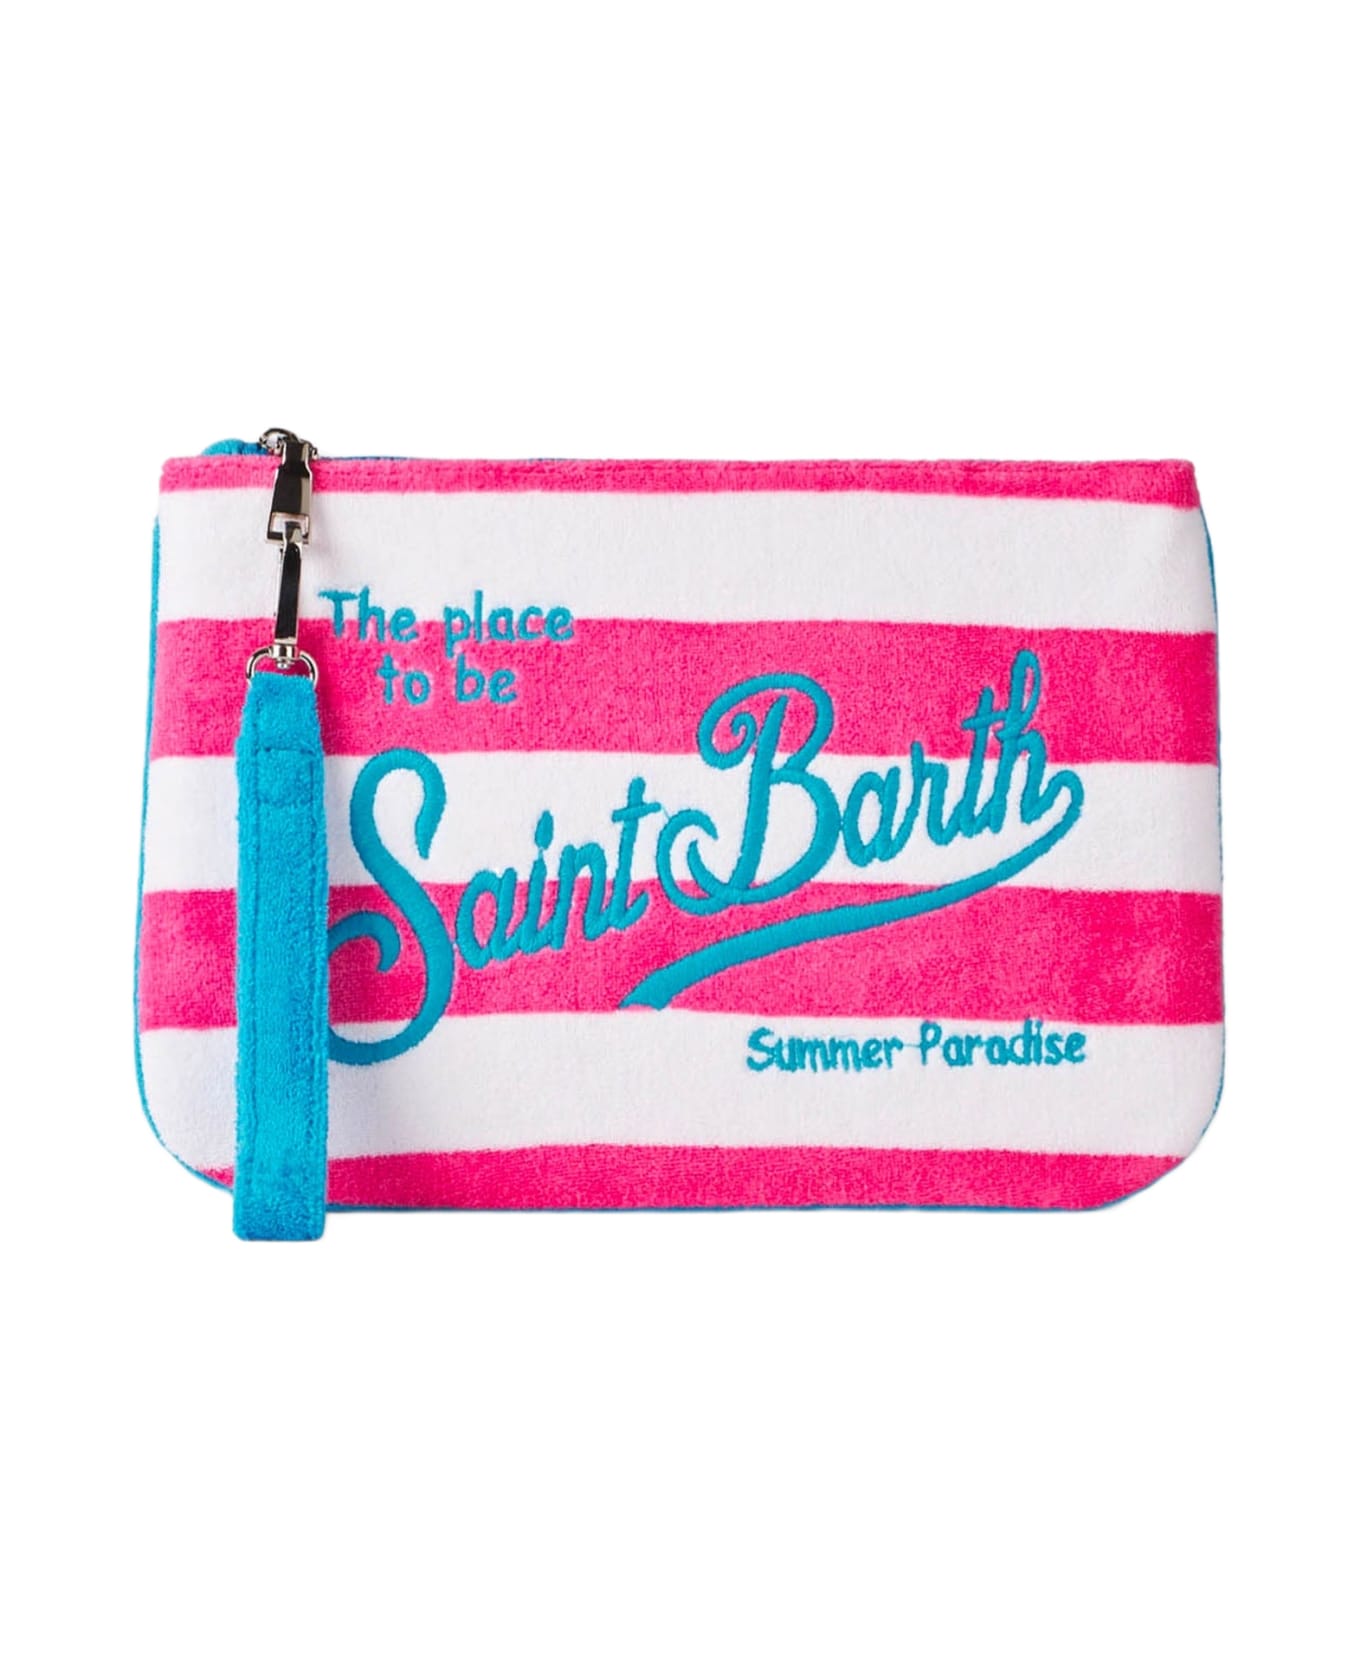 MC2 Saint Barth Parisienne Terry Pochette With White And Fuchsia Stripes - PINK クラッチバッグ